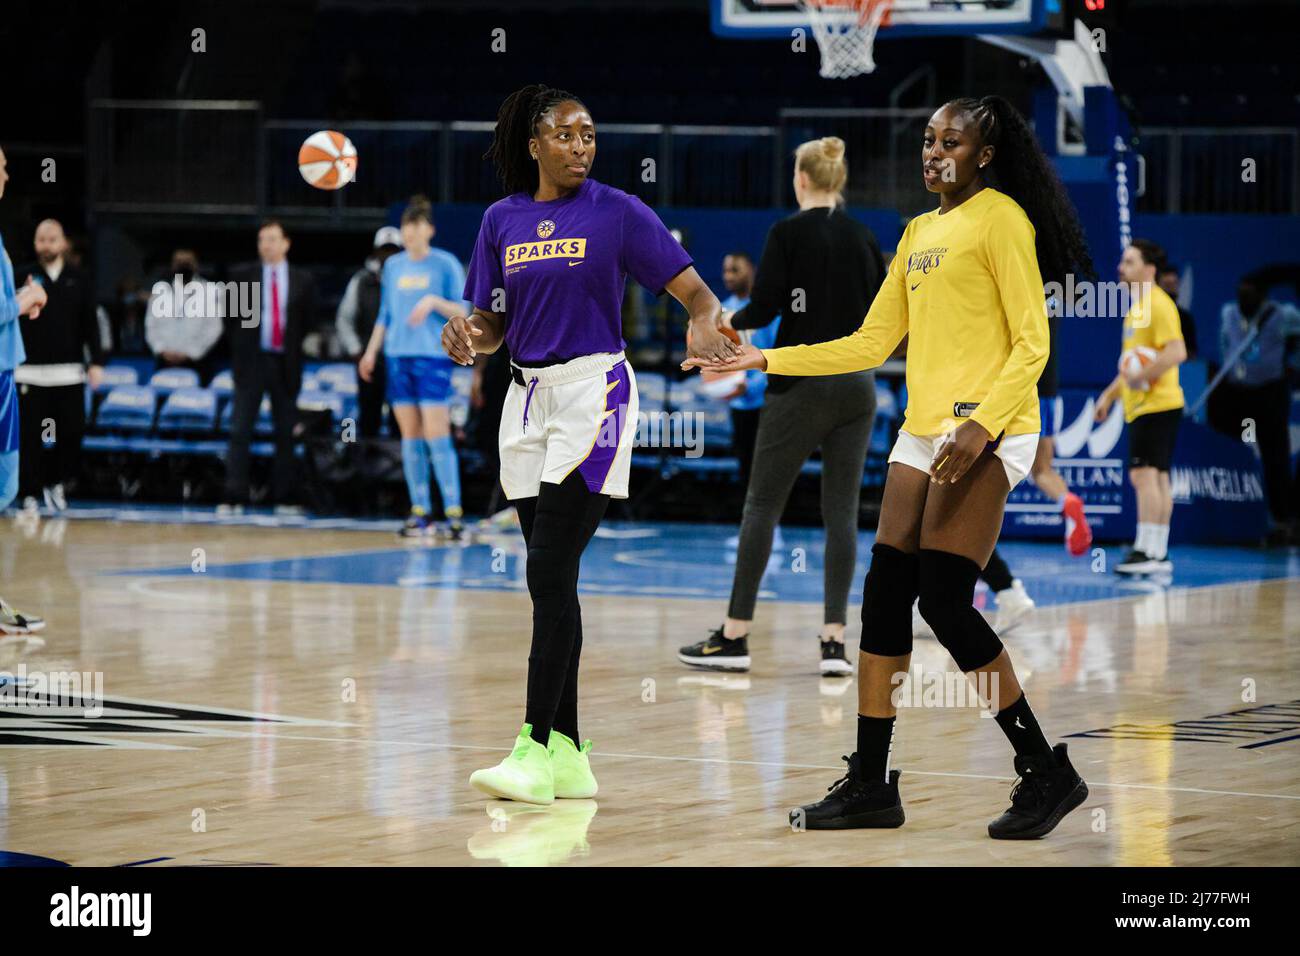 Nneka Ogwumike (30 Los Angeles Sparks) and sister Chiney Ogwumike (13 Los Angeles Sparks) warm up before the WNBA basketball game between the Chicago Sky and Los Angeles Sparks on Friday May 6th, 2022 at Wintrust Arena, Chicago, USA. (NO COMMERCIAL USAGE)  Shaina Benhiyoun/SPP Stock Photo